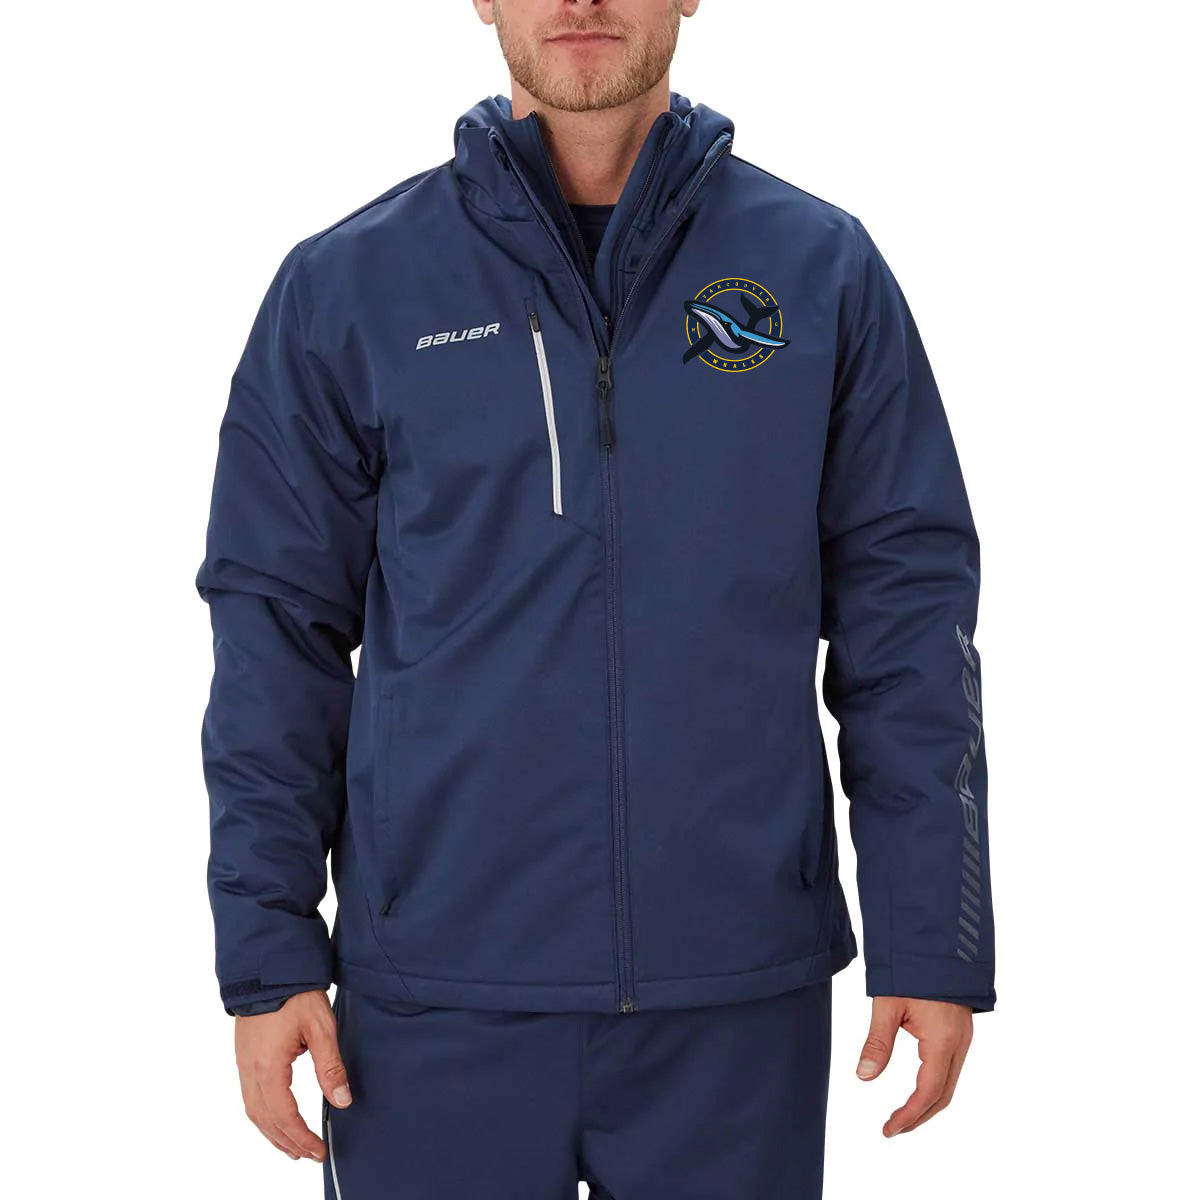 Vancouver Whales -- Senior Bauer Midweight Jacket